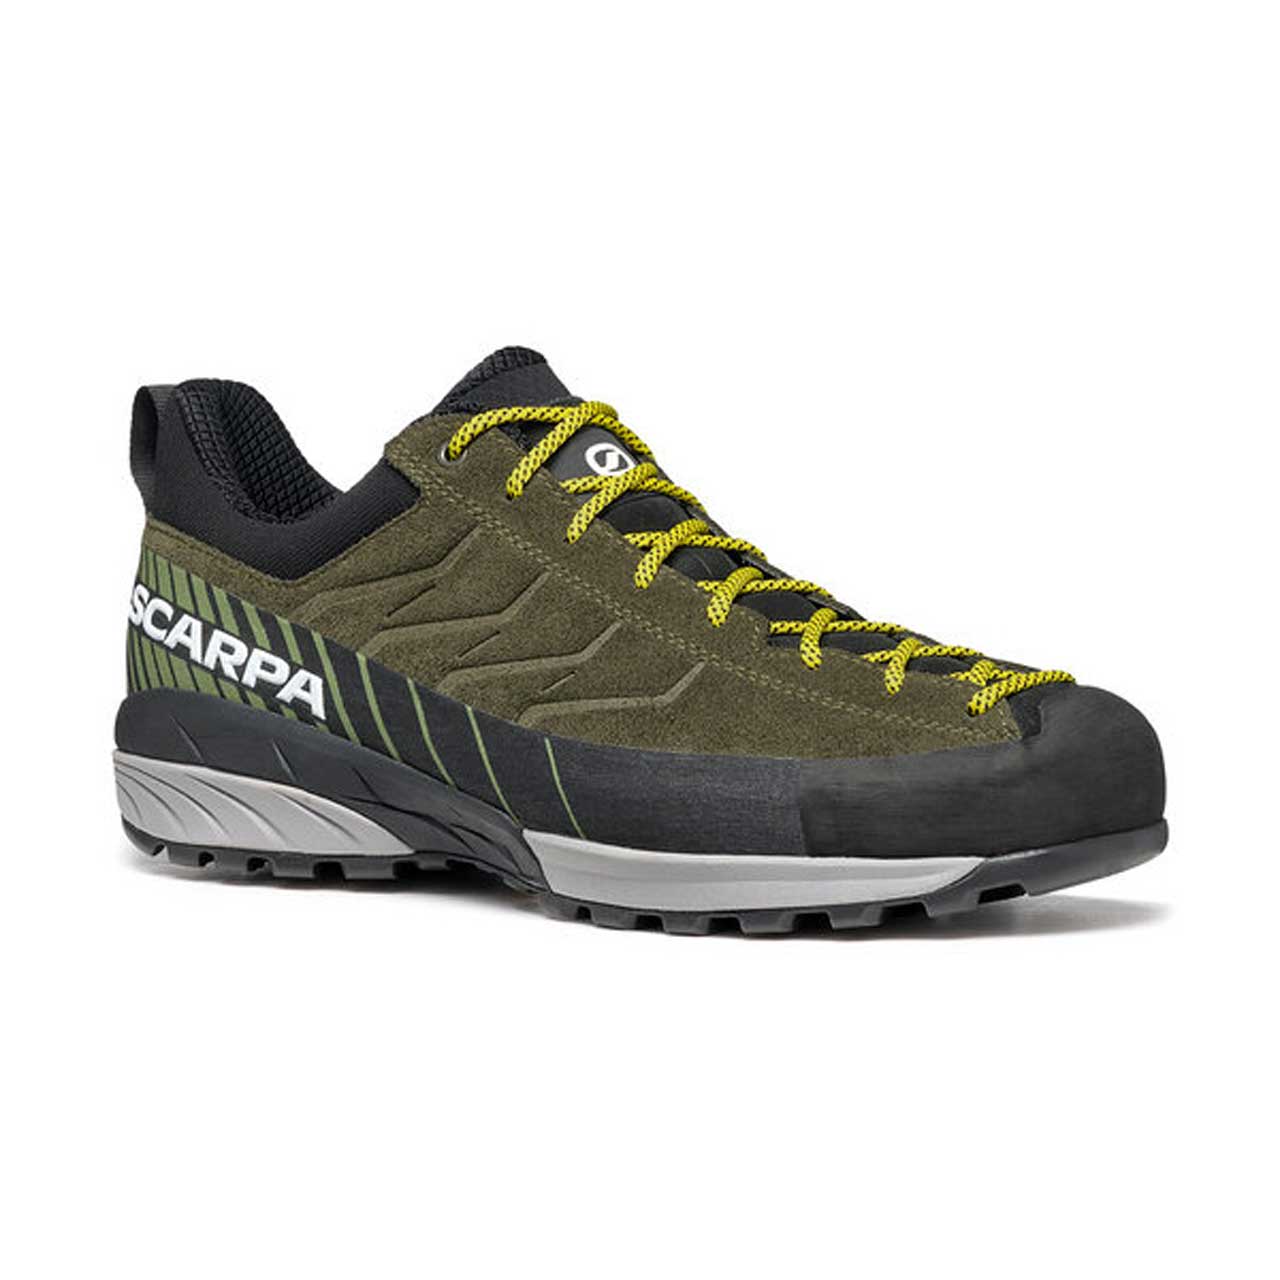 Scarpa Mescalito - Thyme Green/Forest, 43